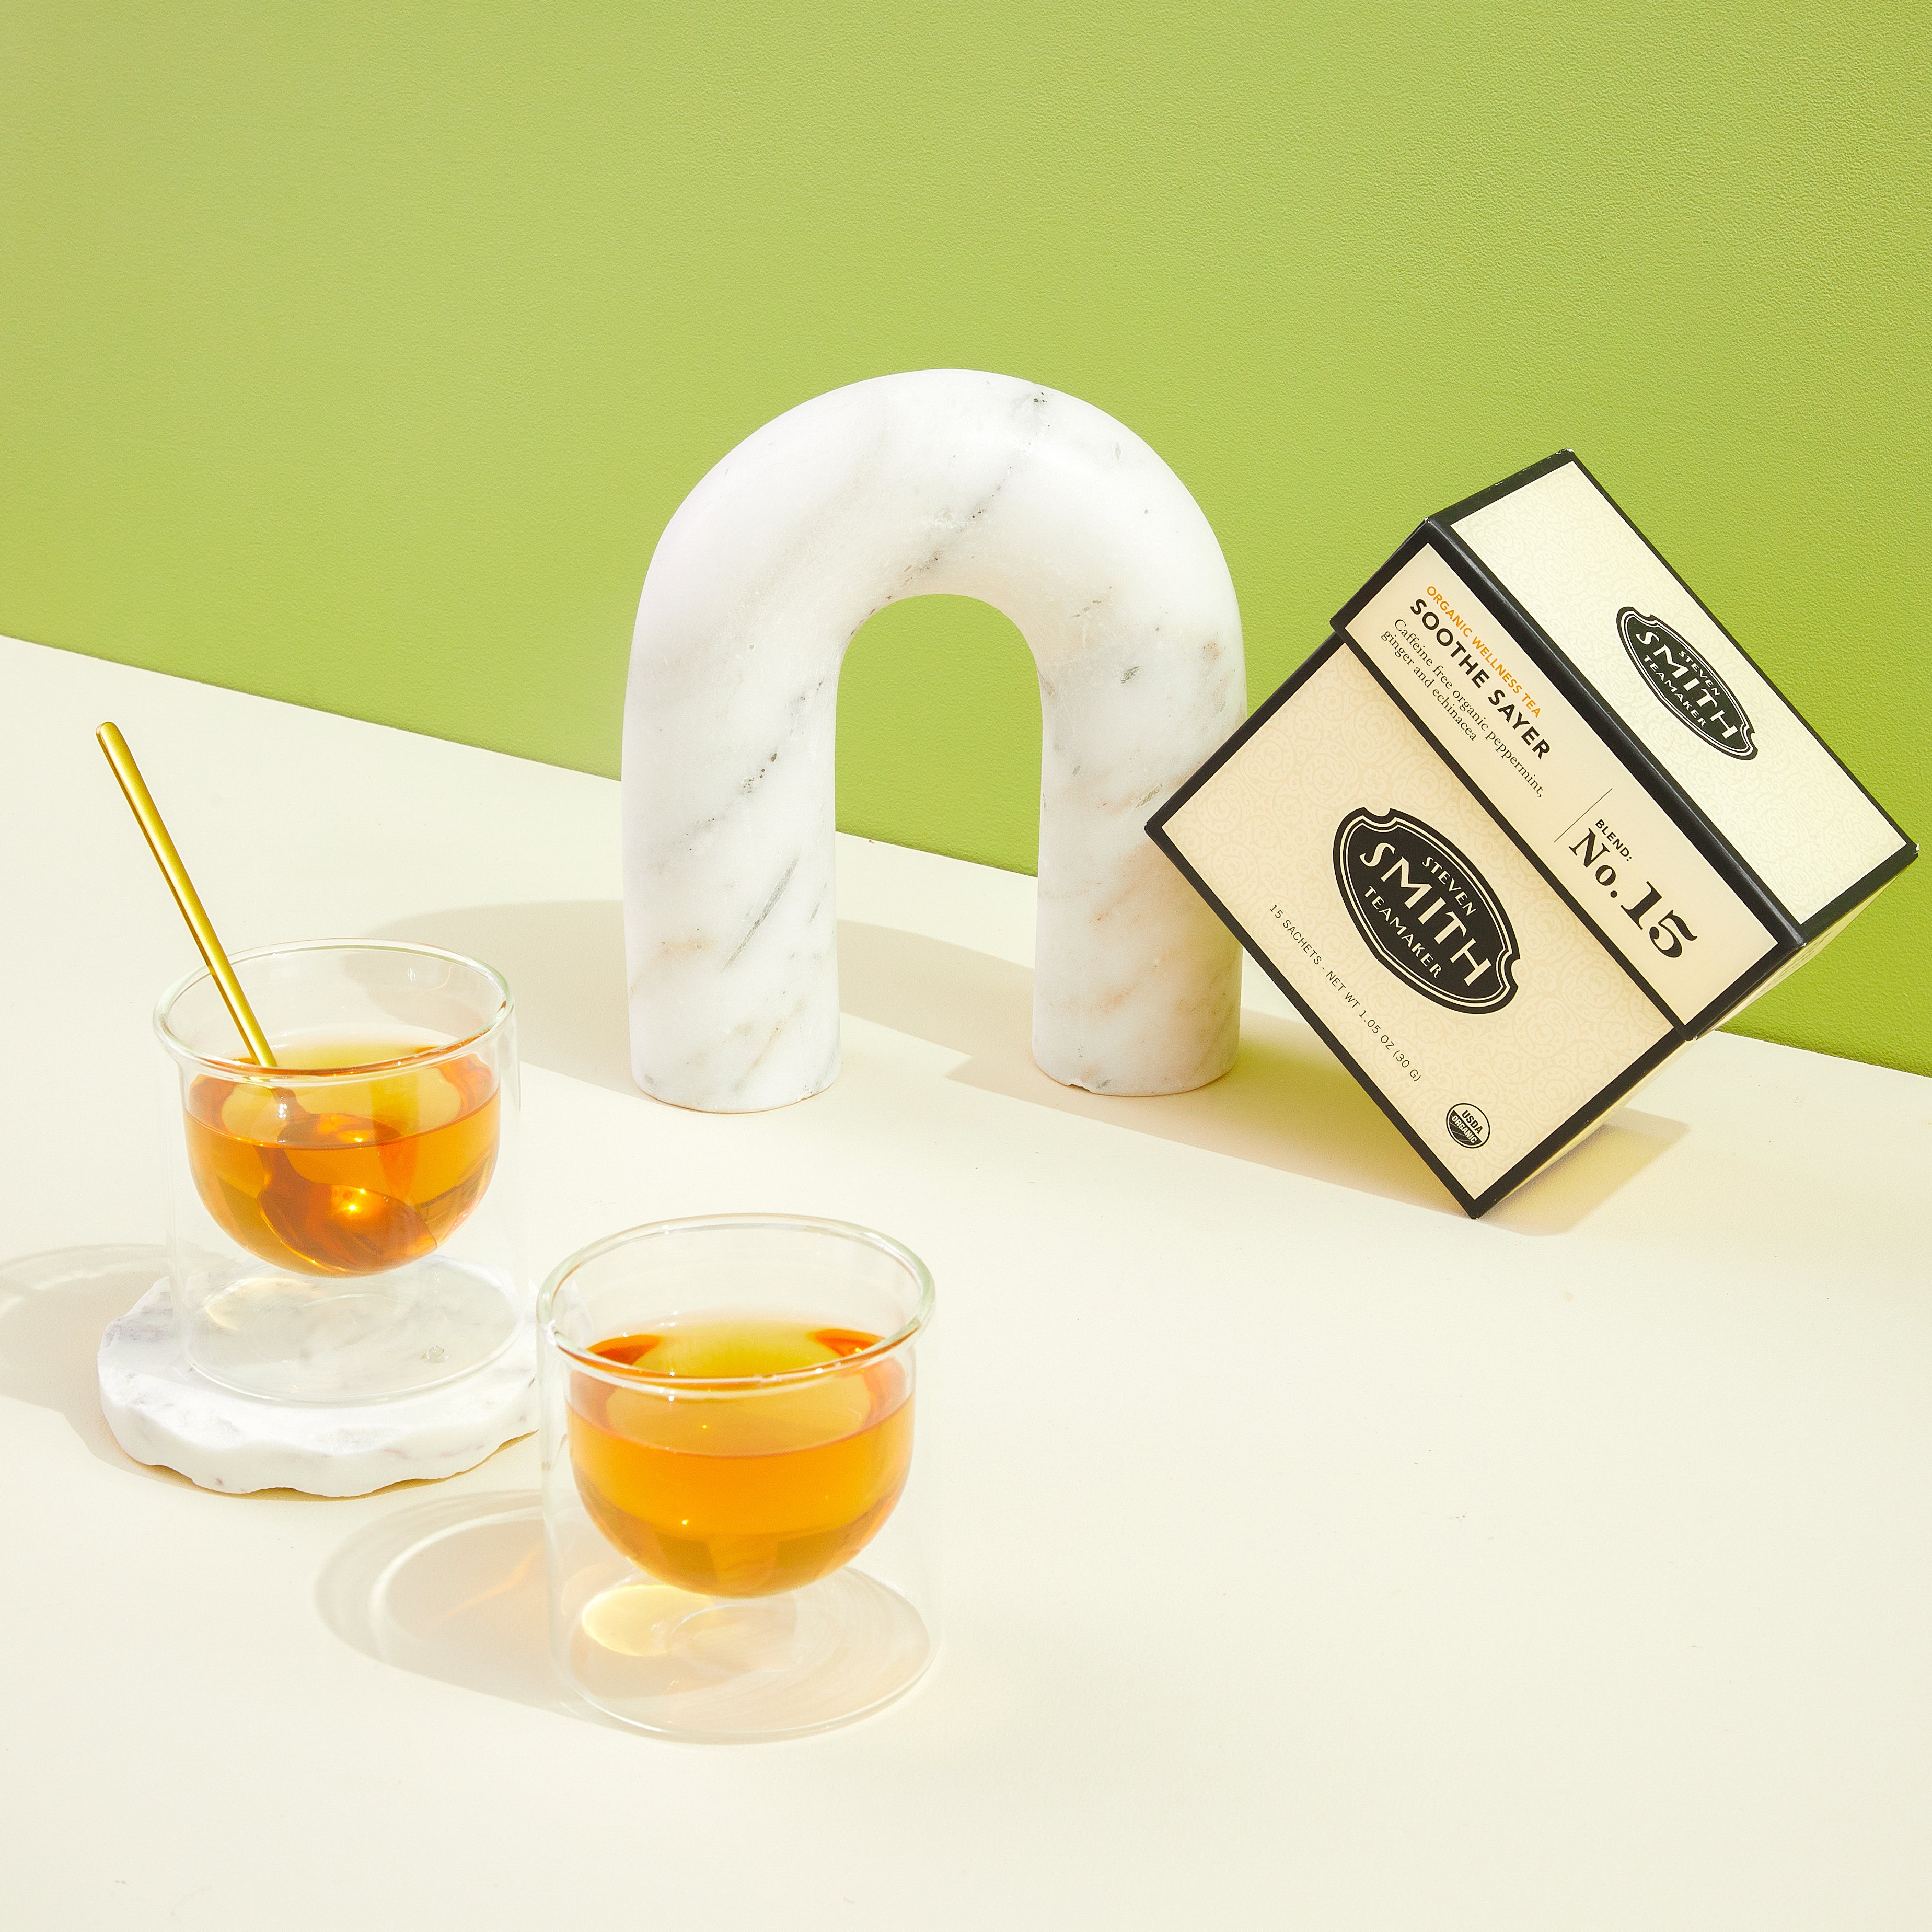 Cream carton of Soothe Sayer wellness tea with two glass cups on a table.